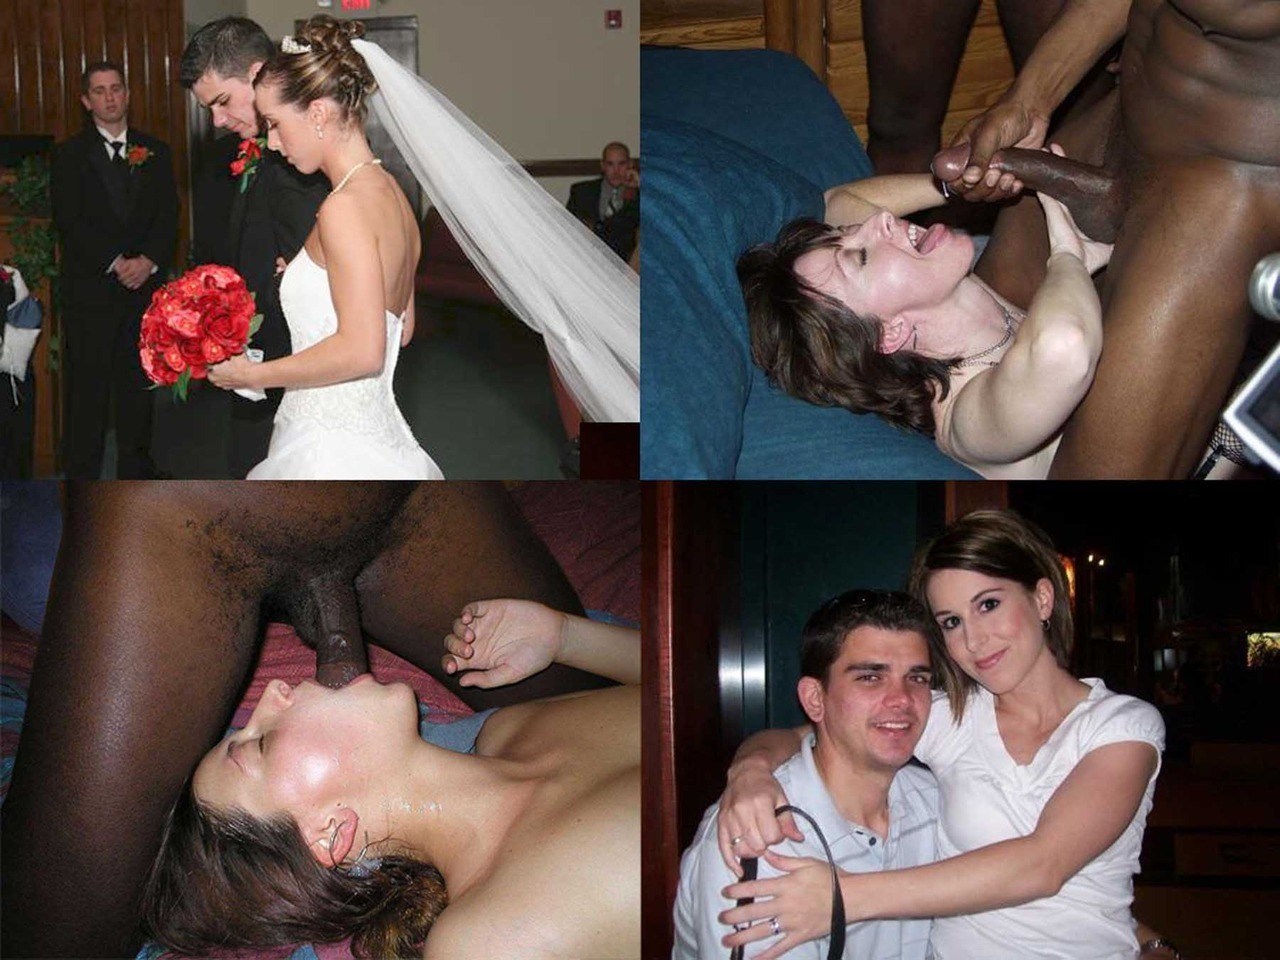 Sex with his wife on their wedding night (49 photos) photo